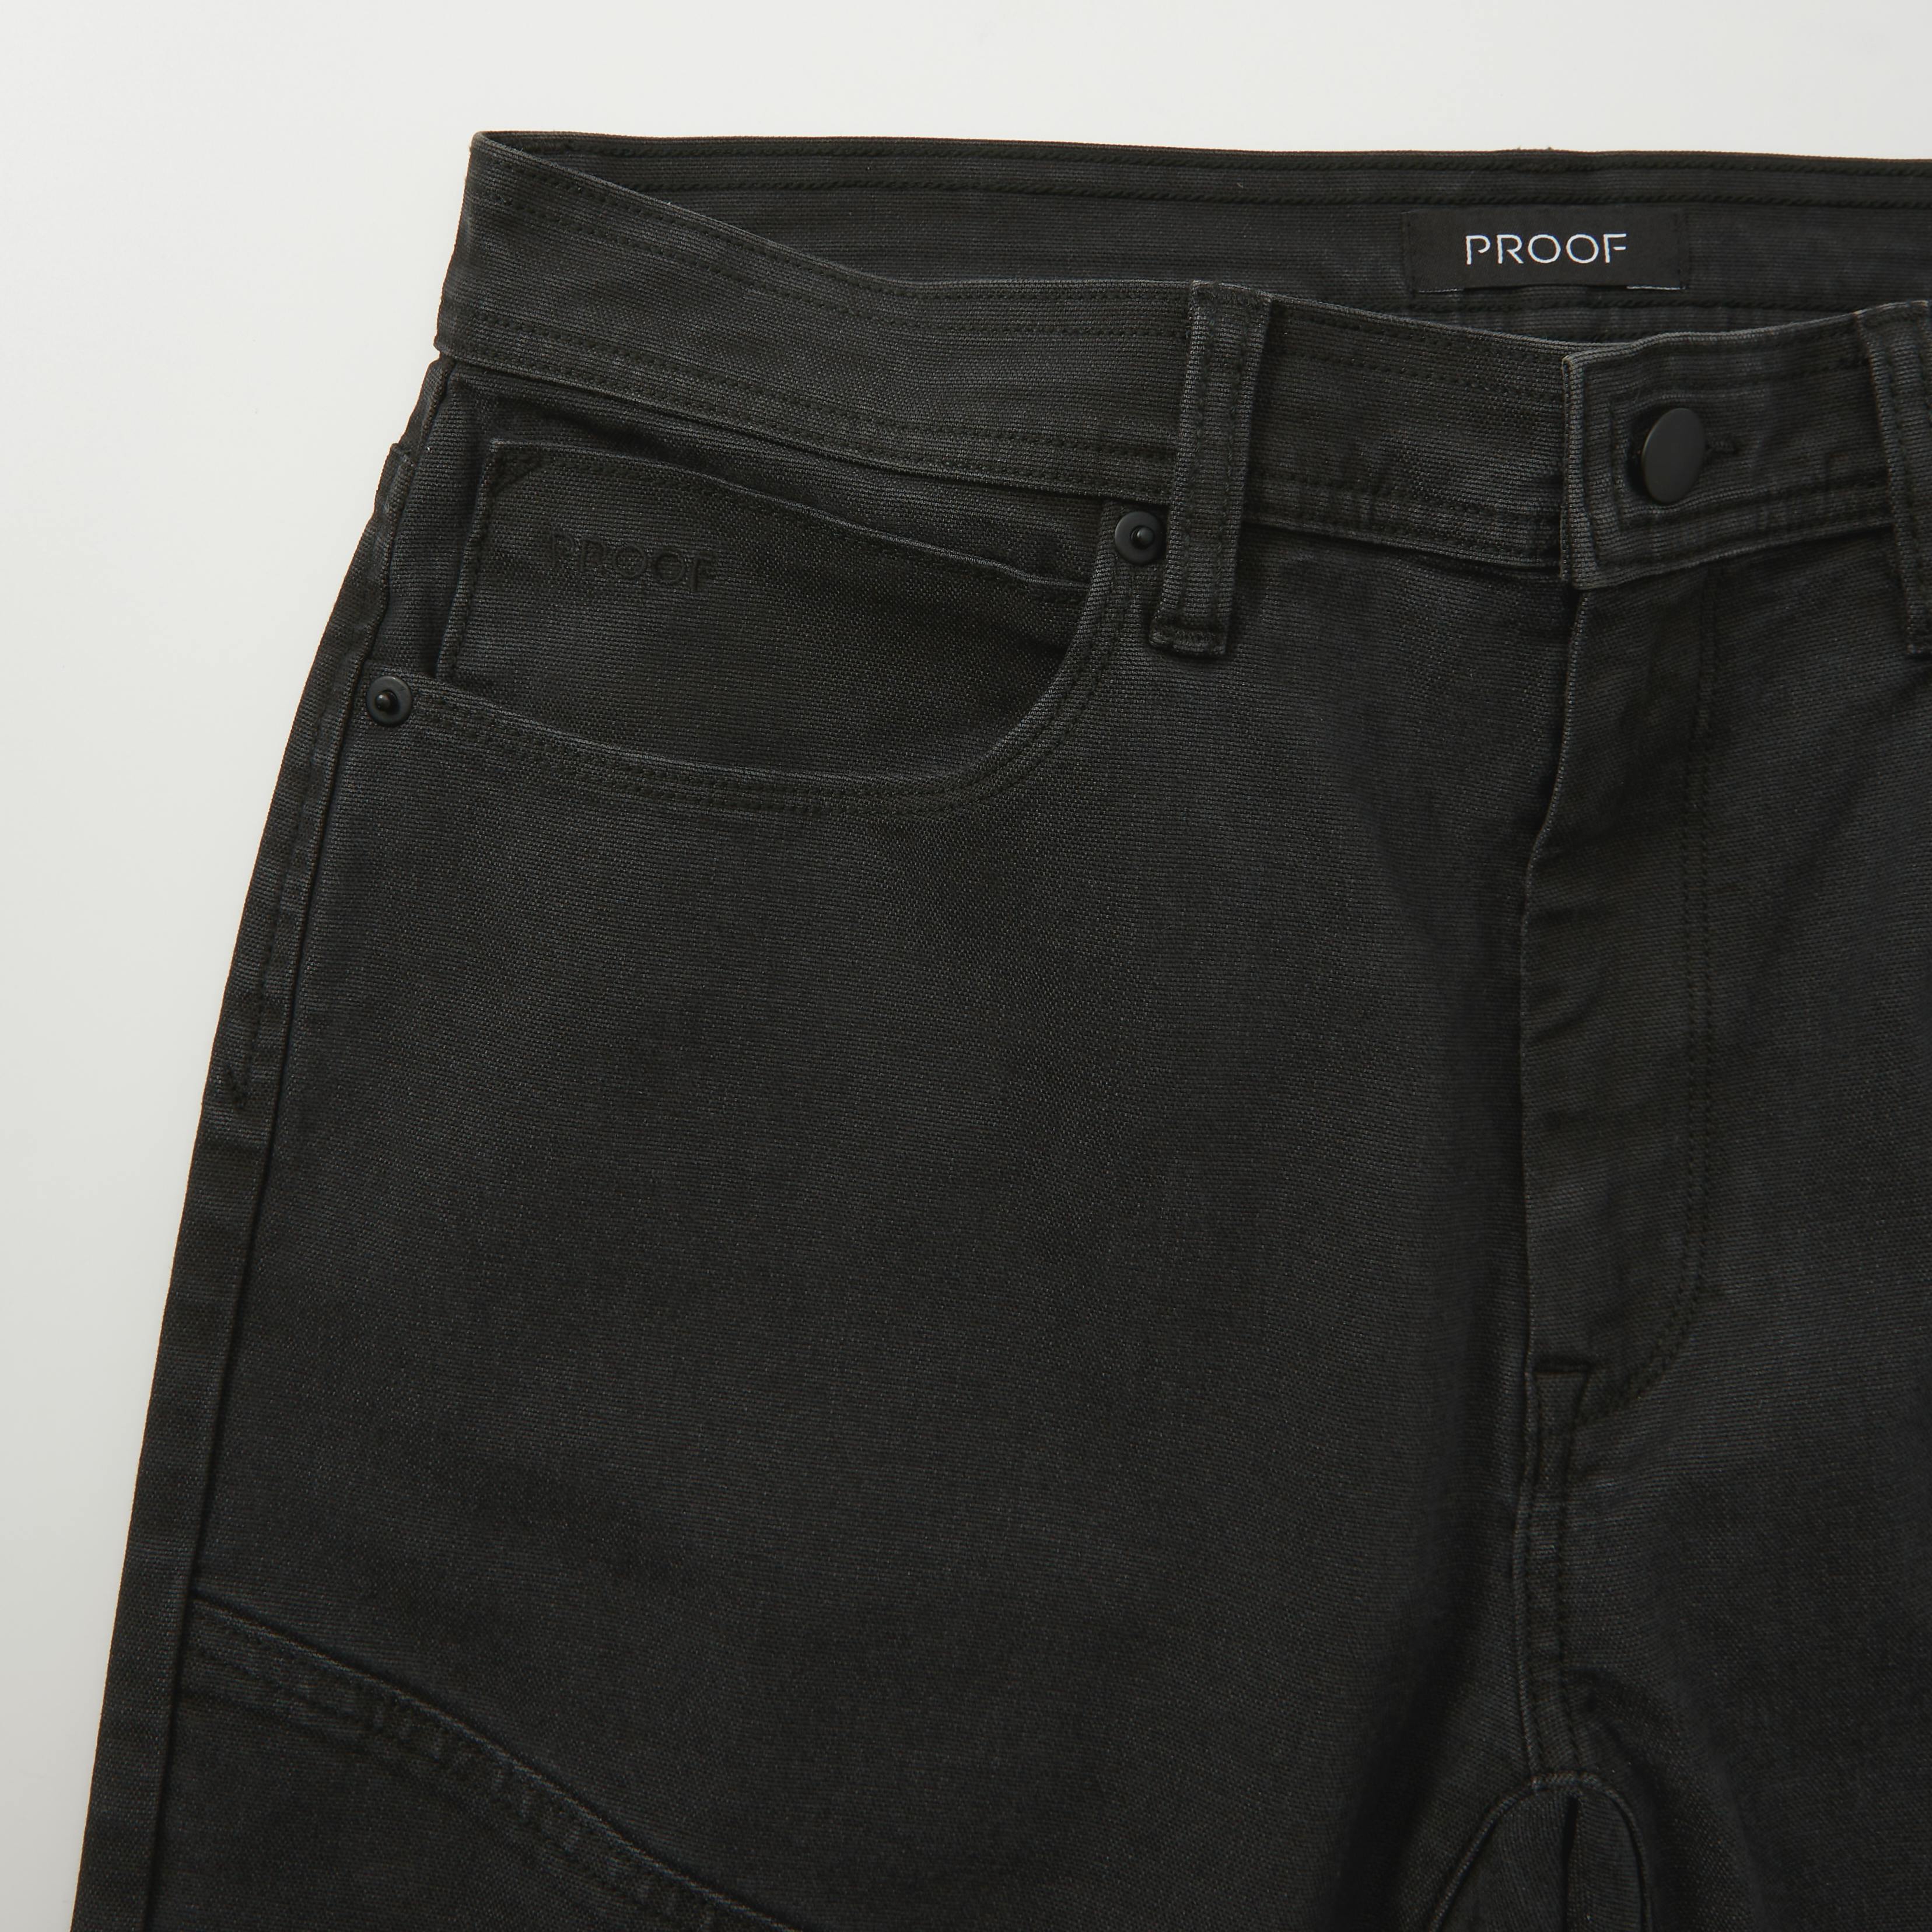 Proof Rover Double-Knee Work Pant - Straight - Anthracite/Black, Work Pants